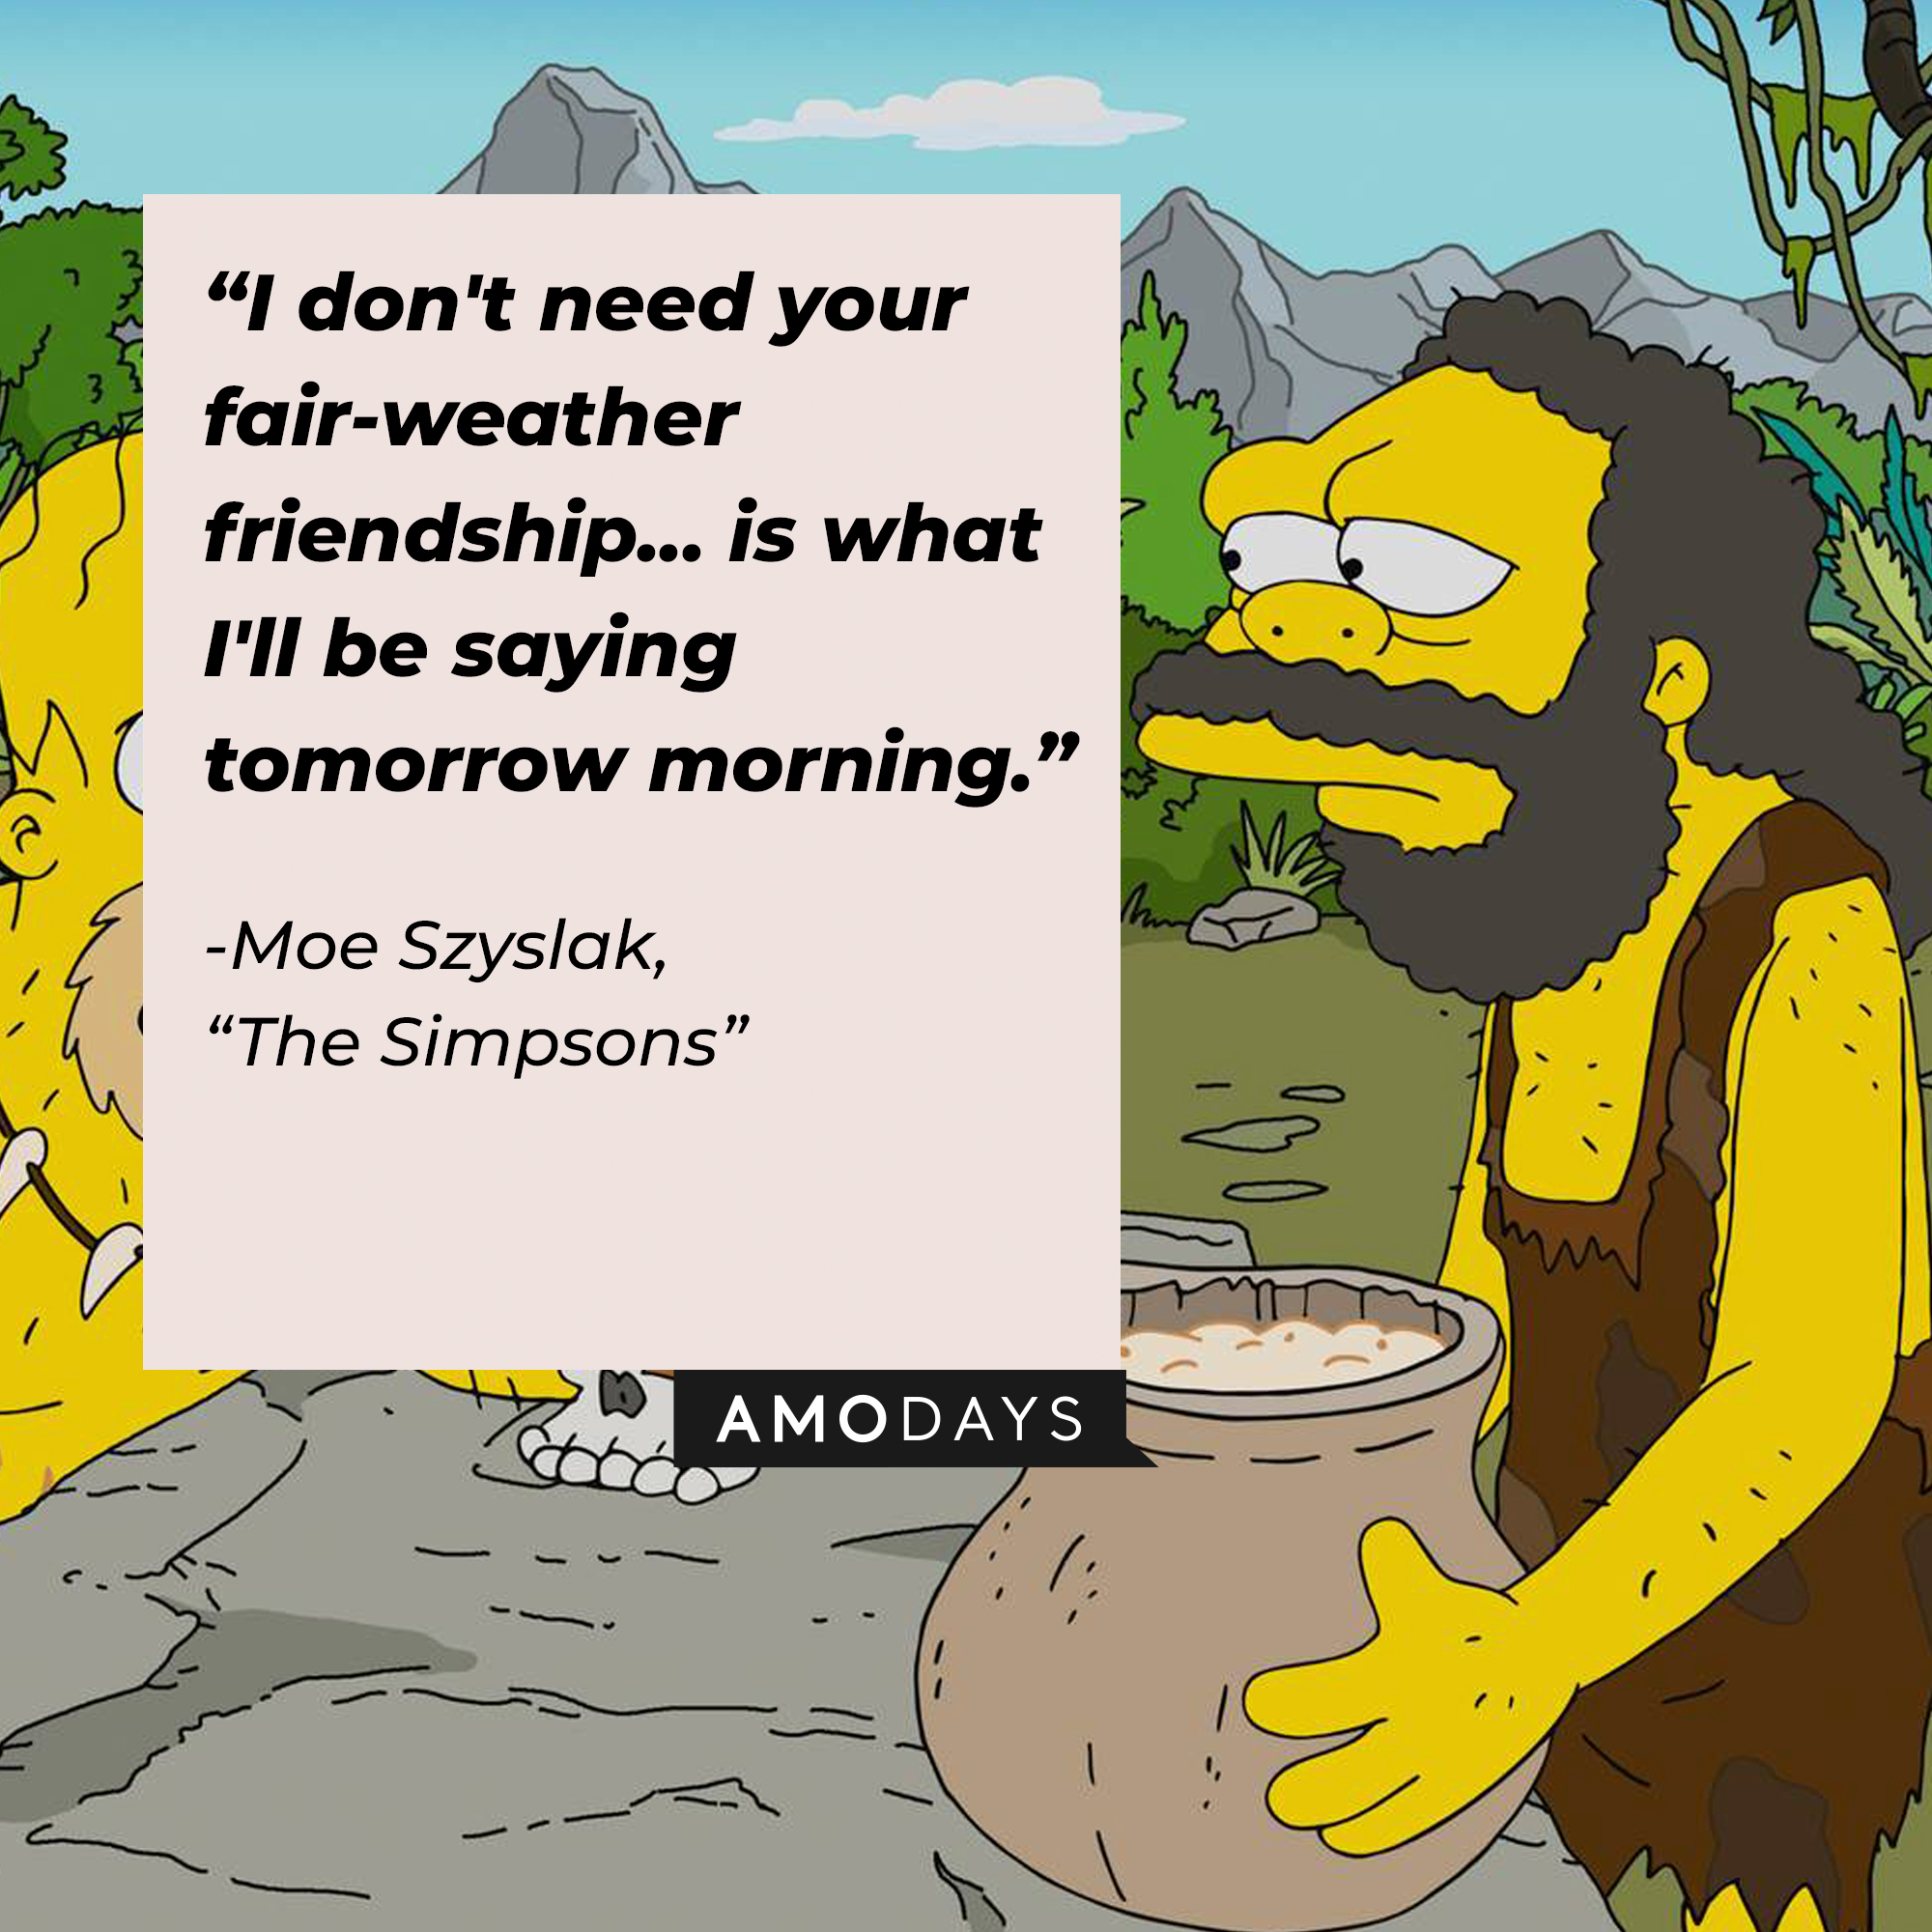 Image of Moe Szyslak with his quote from "The Simpsons:" "I don't need your fair-weather friendship... is what I'll be saying tomorrow morning." | Source: Facebook.com/TheSimpsons